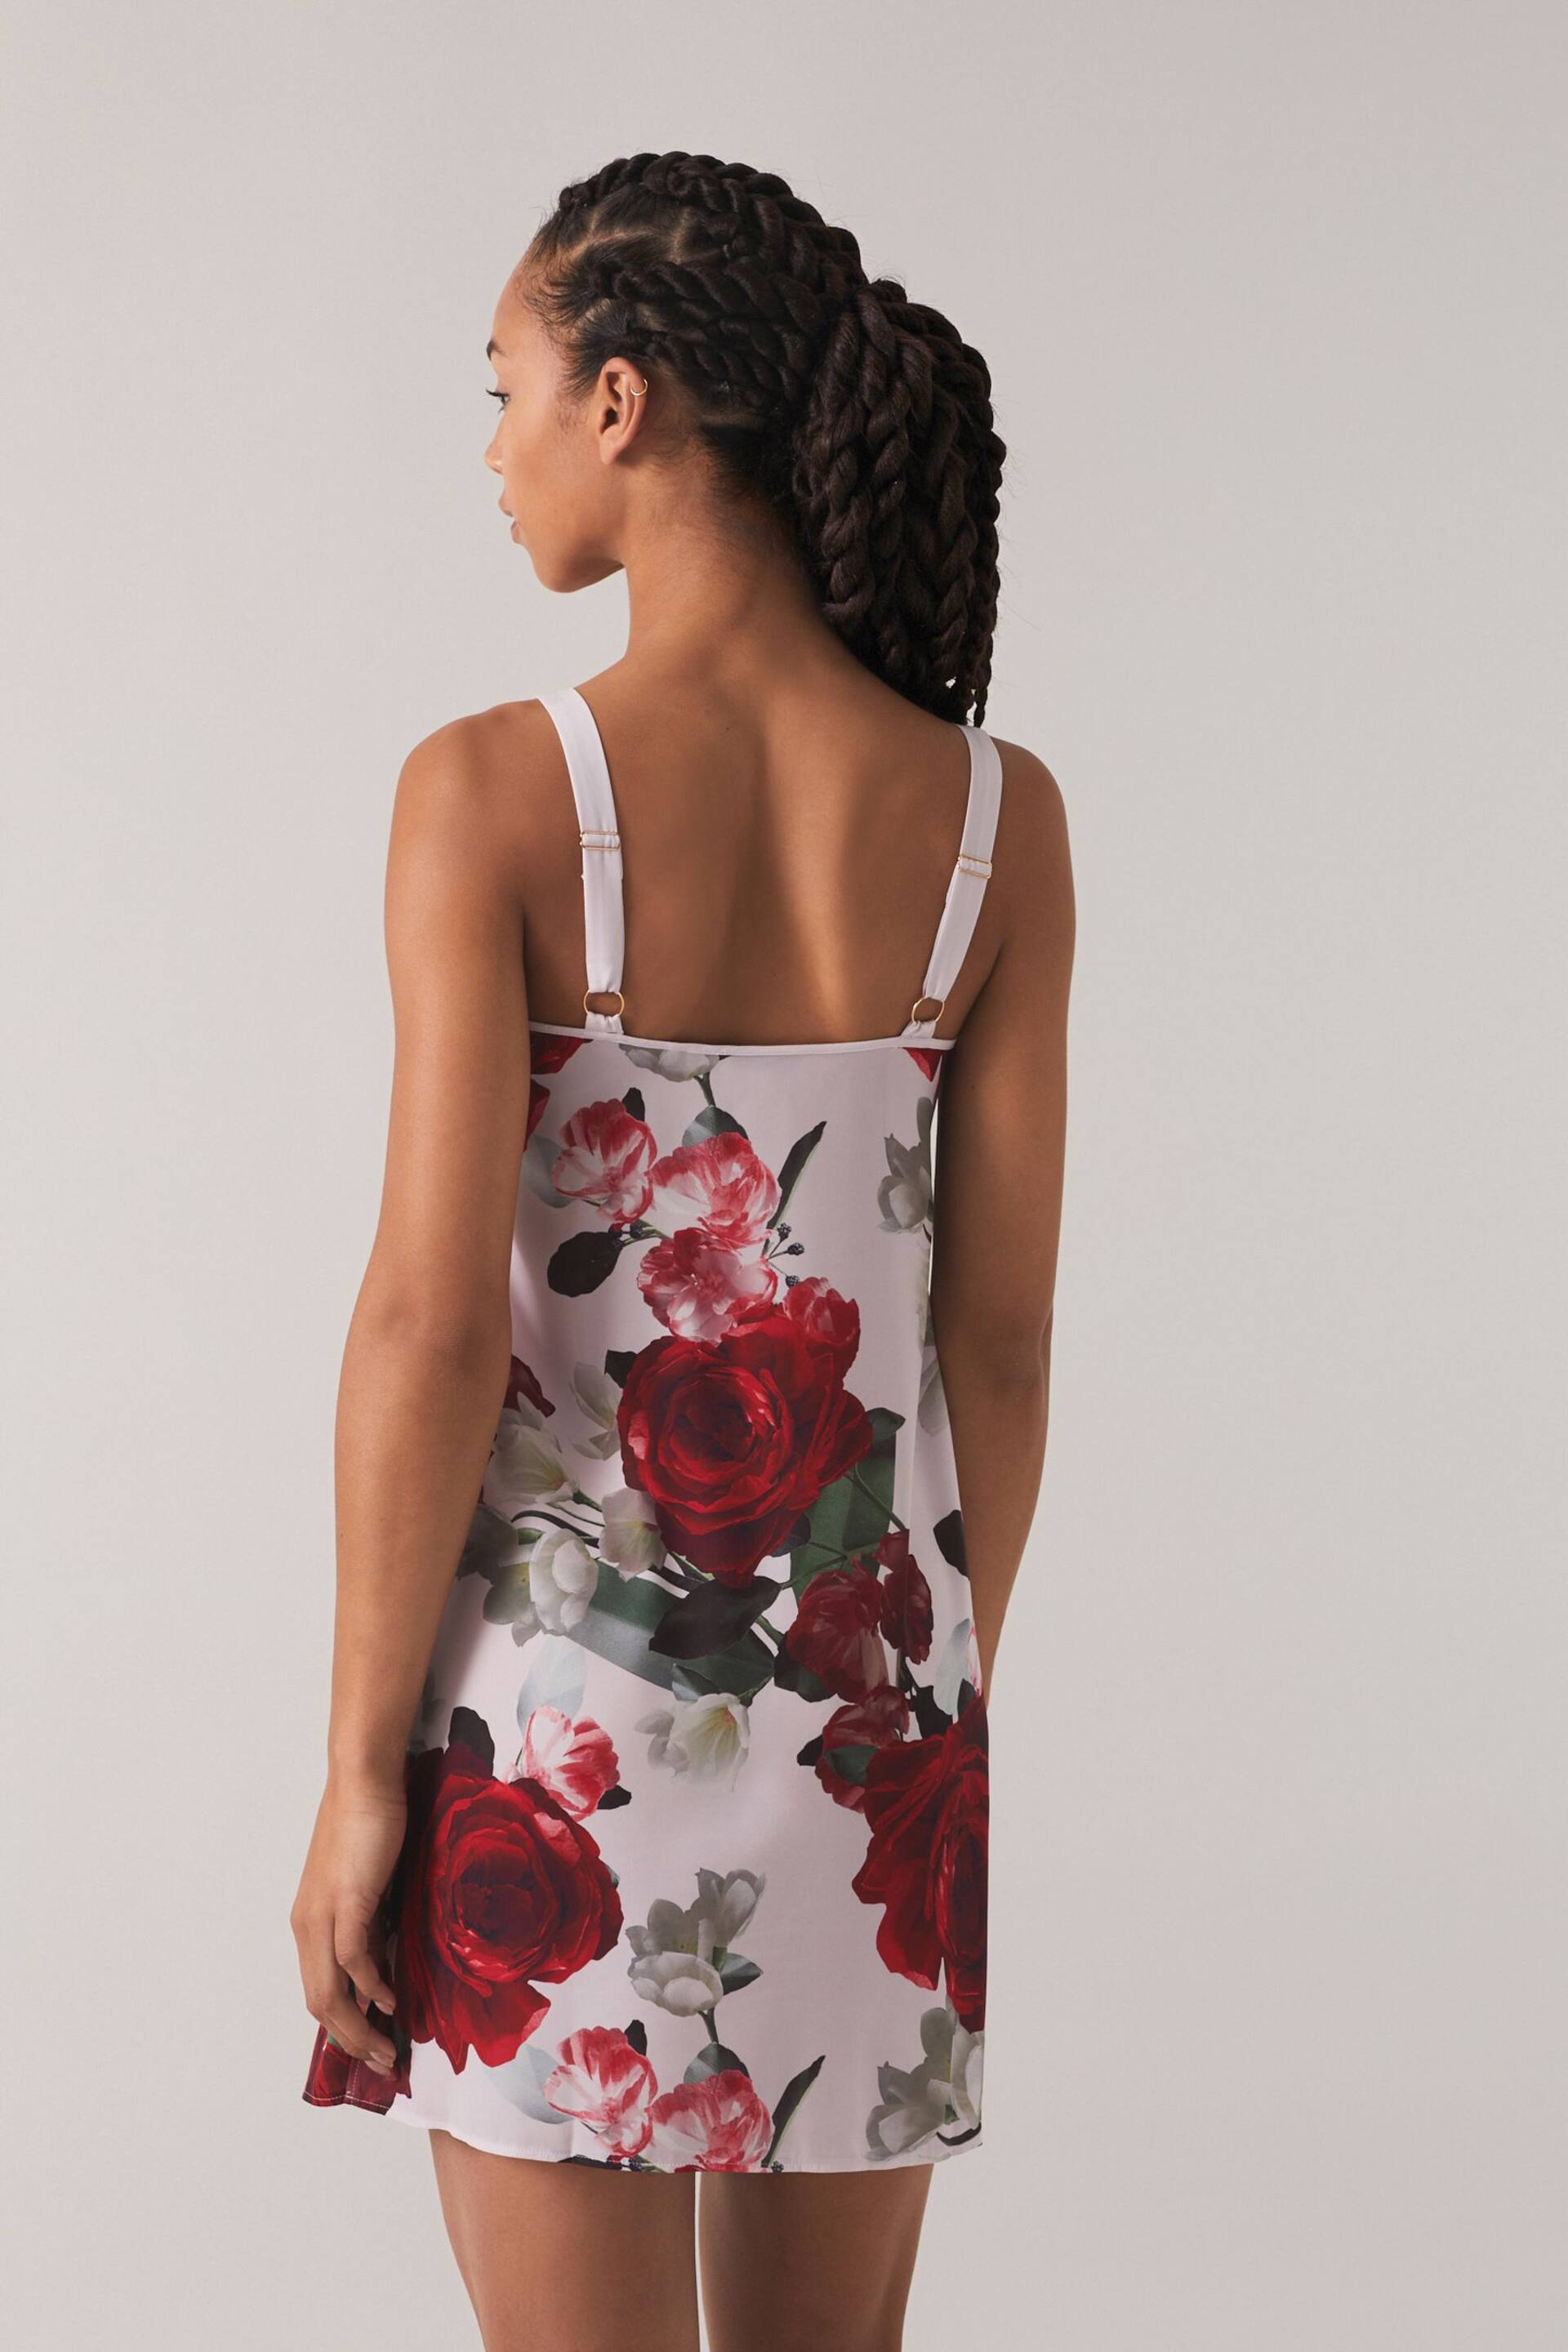 B by Ted Baker Floral Satin Lace Slip Night Dress - Image 2 of 8